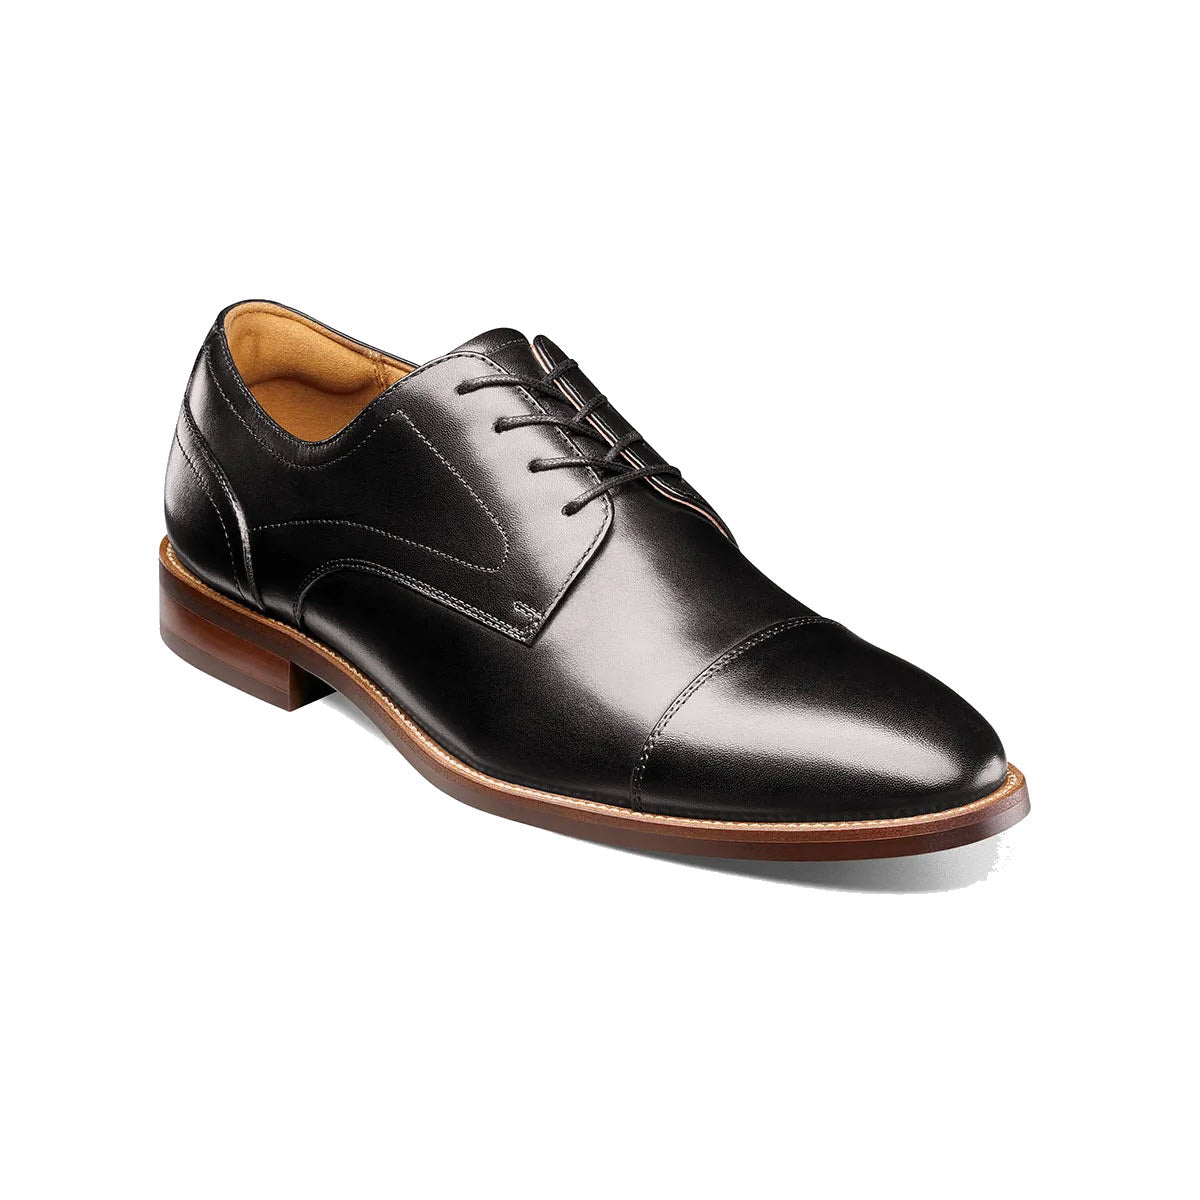 A single Florsheim FLORSHEIM RUCCI CAP TOE OXFORD BLACK - MENS, crafted from black leather with laces, displayed on a white background.